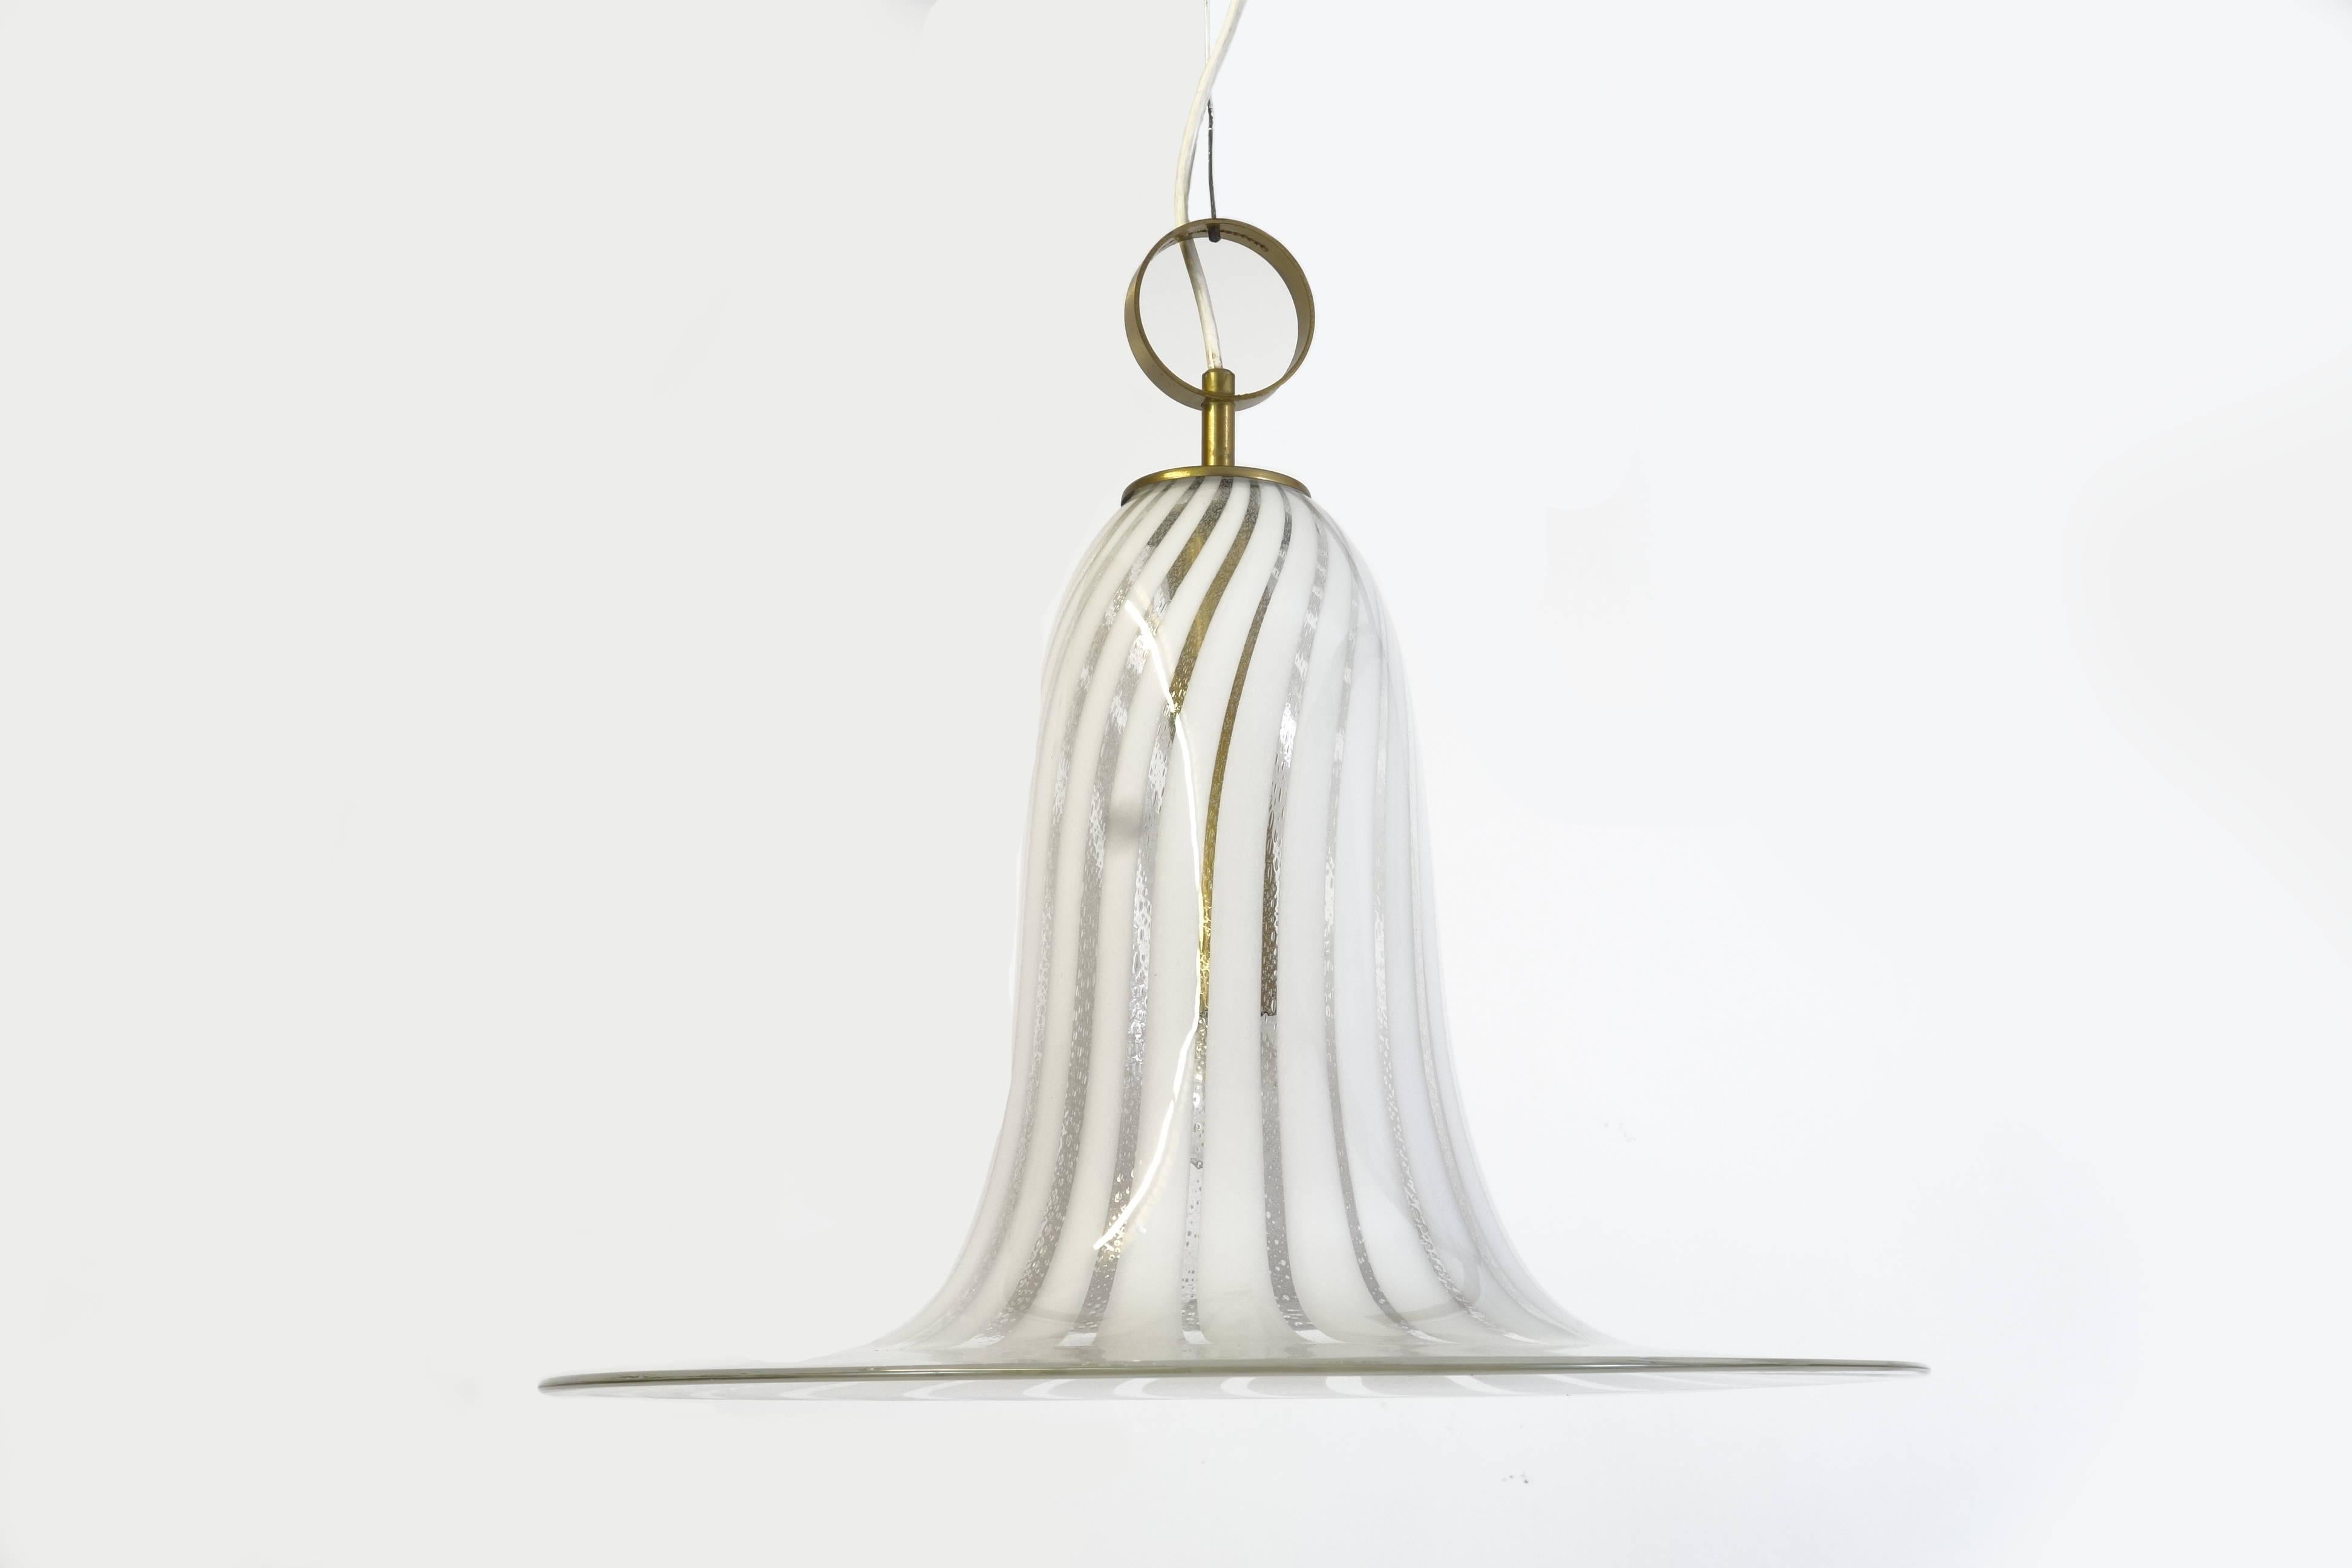 A single piece of handmade Murano glass forms the bell shape of this extraordinary chandelier of Italian origin. The object was most probably manufactured during the 1970s. The staggered stripe pattern in the glass forms an extremely attractive